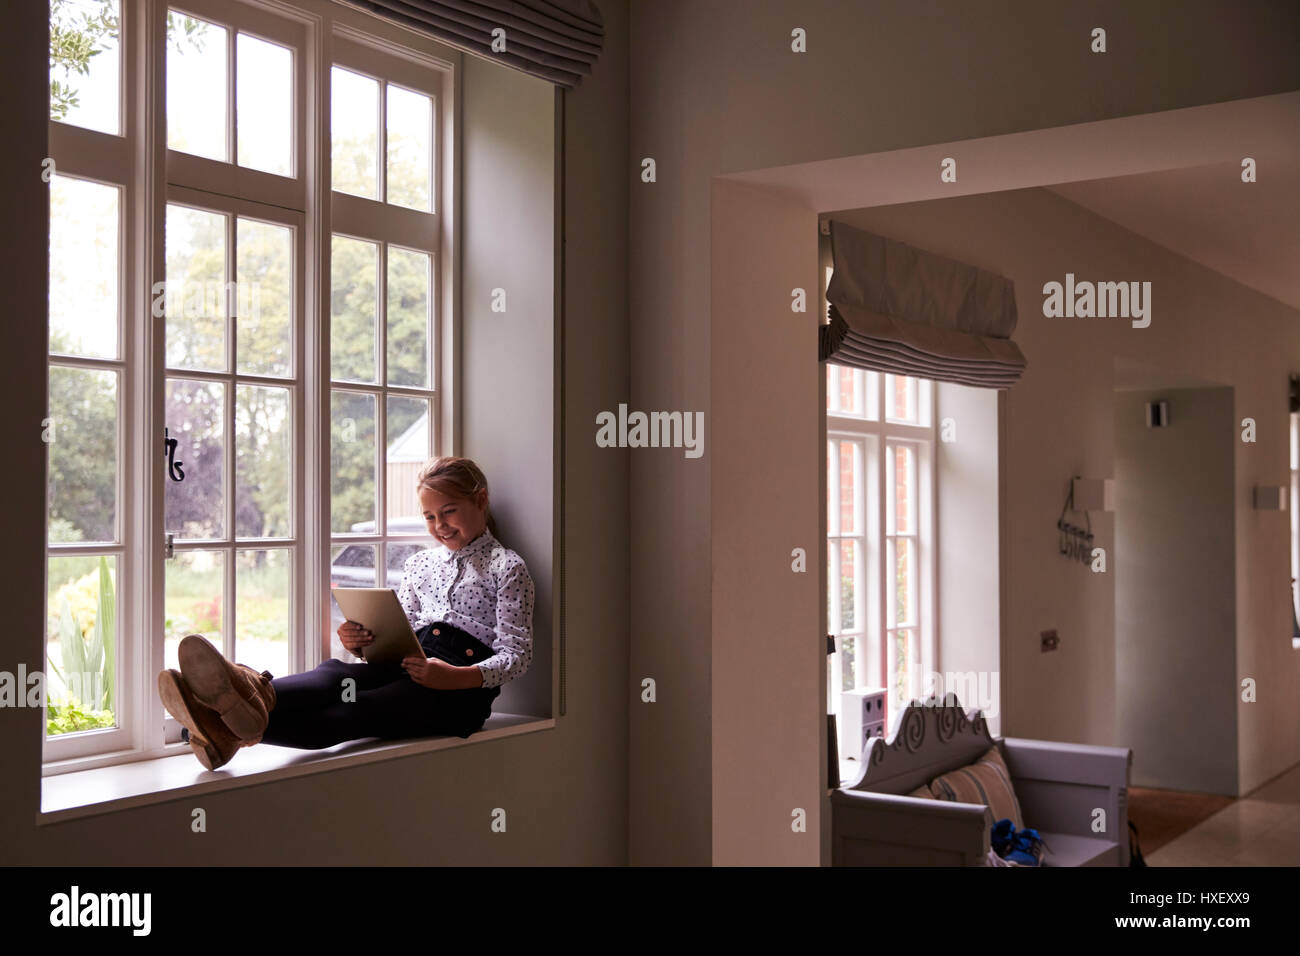 Girl Sits By Window At Home Using Digital Tablet Stock Photo